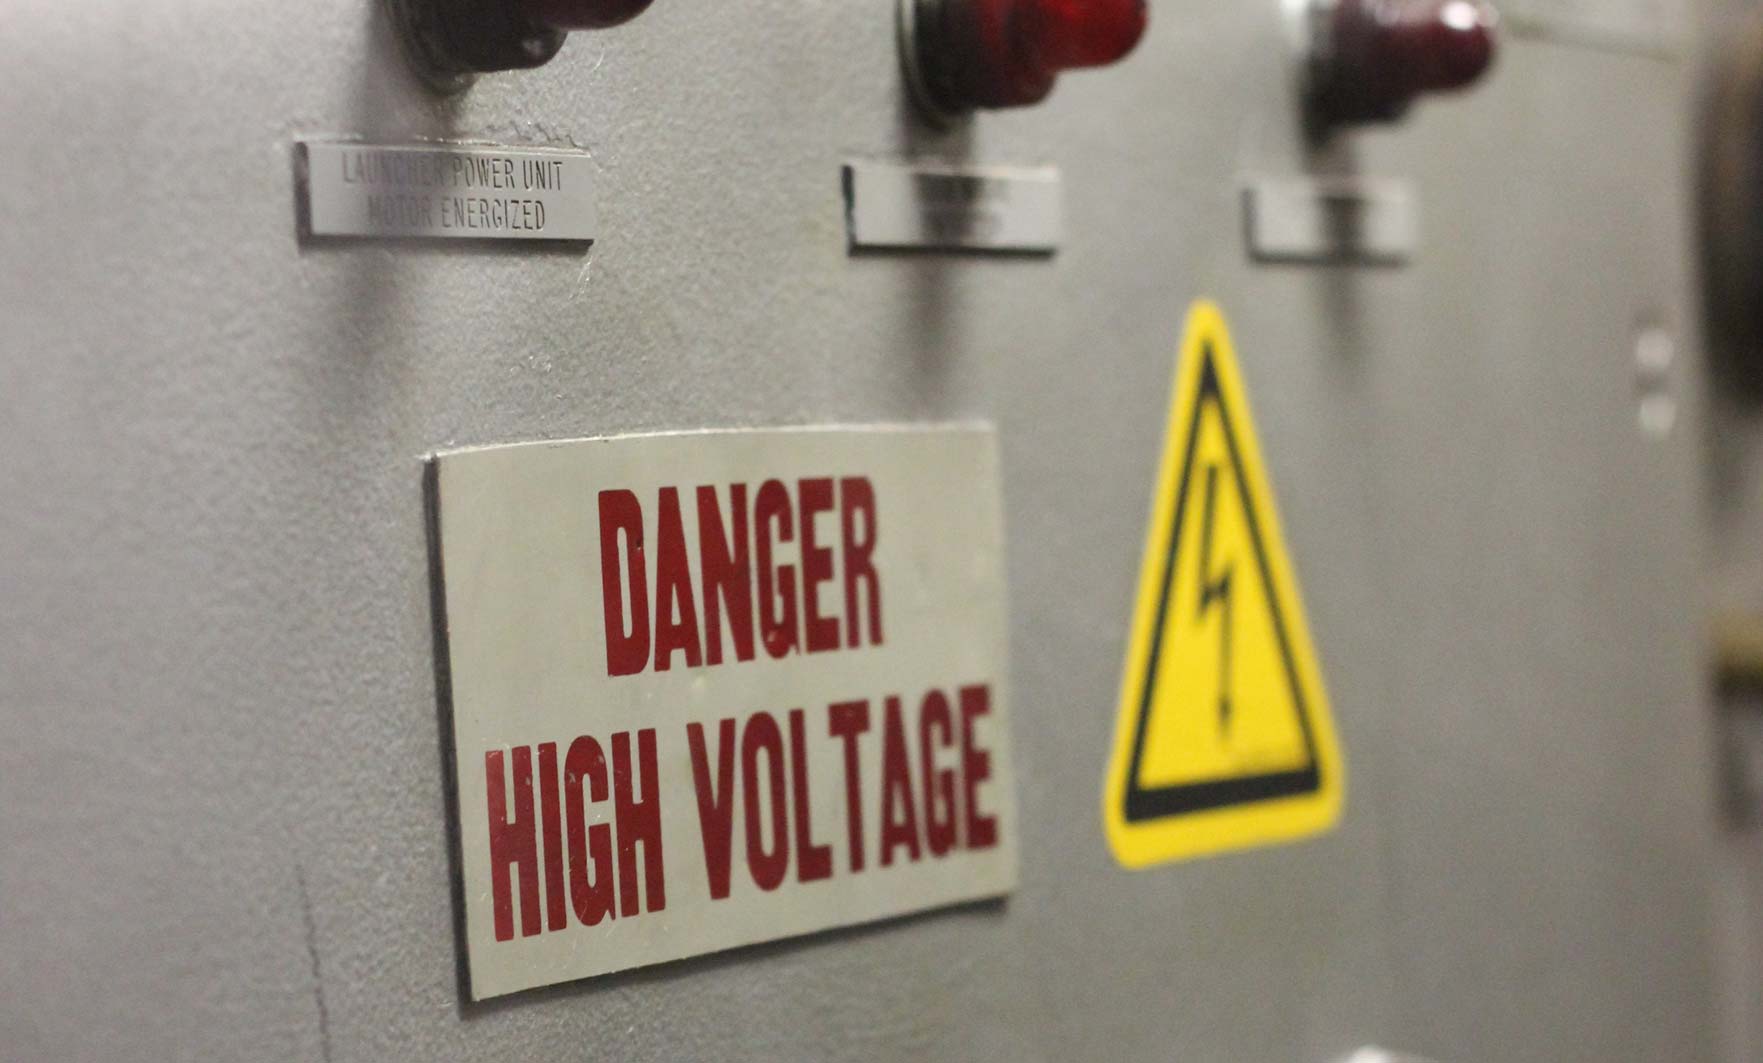 stcw high voltage operational